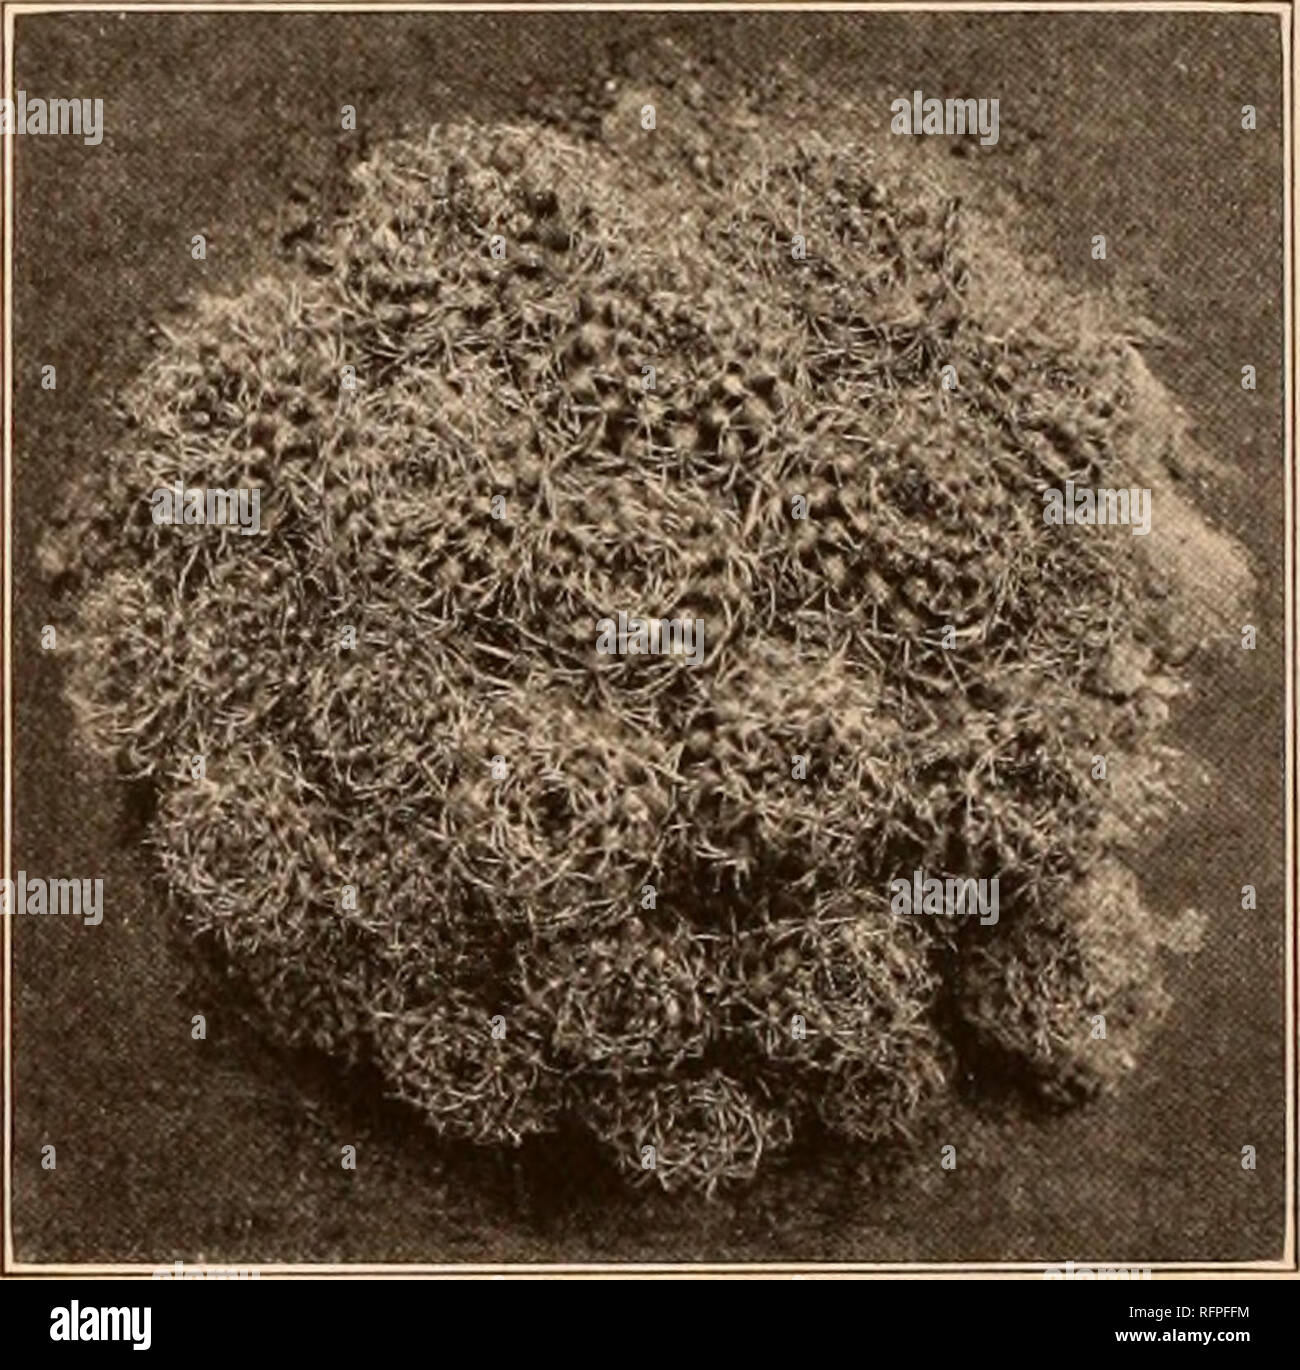 . Carnegie Institution of Washington publication. PRAILEA. 209 Key to Species. Stems cylindrie, usually simple 1. F. gracillima Stems globular, more or less eespitose. Seeds puberulent 2. F. grahliana Seeds smooth. Ribs more distinct than in the other species 3. F. pumila Ribs very indistinct. Radial spines 12 to 14 4. F. schilinzkyana Radial spines 5 to 9. Plants usually simple; fruit red 5. F. cataphracta Plants eespitose; fruit black 6. F. pygmaea .,..,.•.• (7. F. caespitosa Uncertain relationship • ^ p knippeliana 1. Frailea gracillima (Lemaire). Echinocactus gracillimus Monville in Lemair Stock Photo